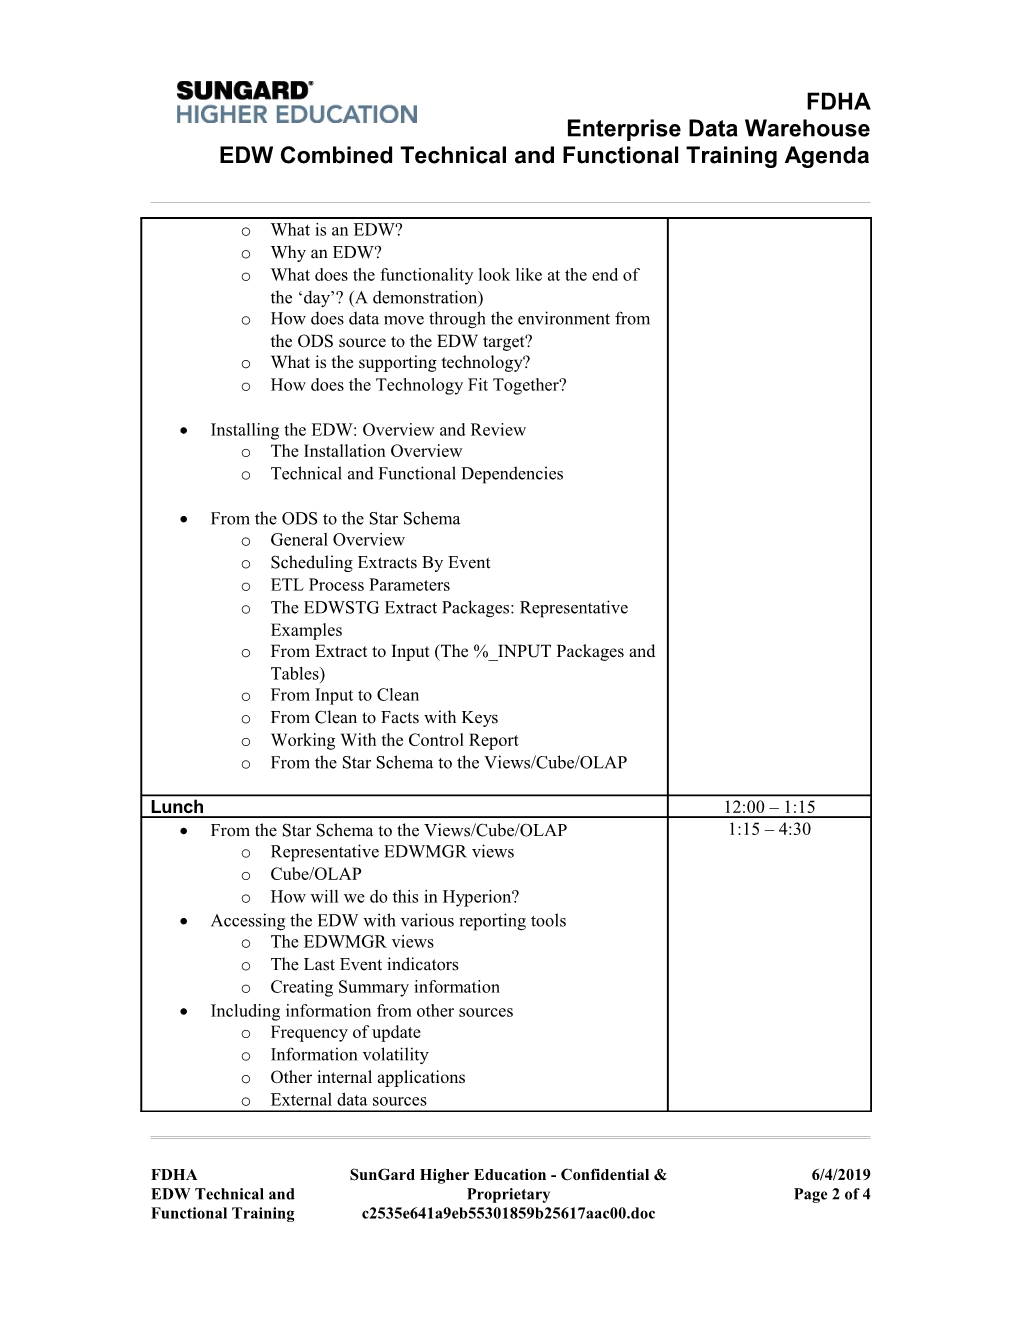 EDW Combined Technical and Functional Training Agenda